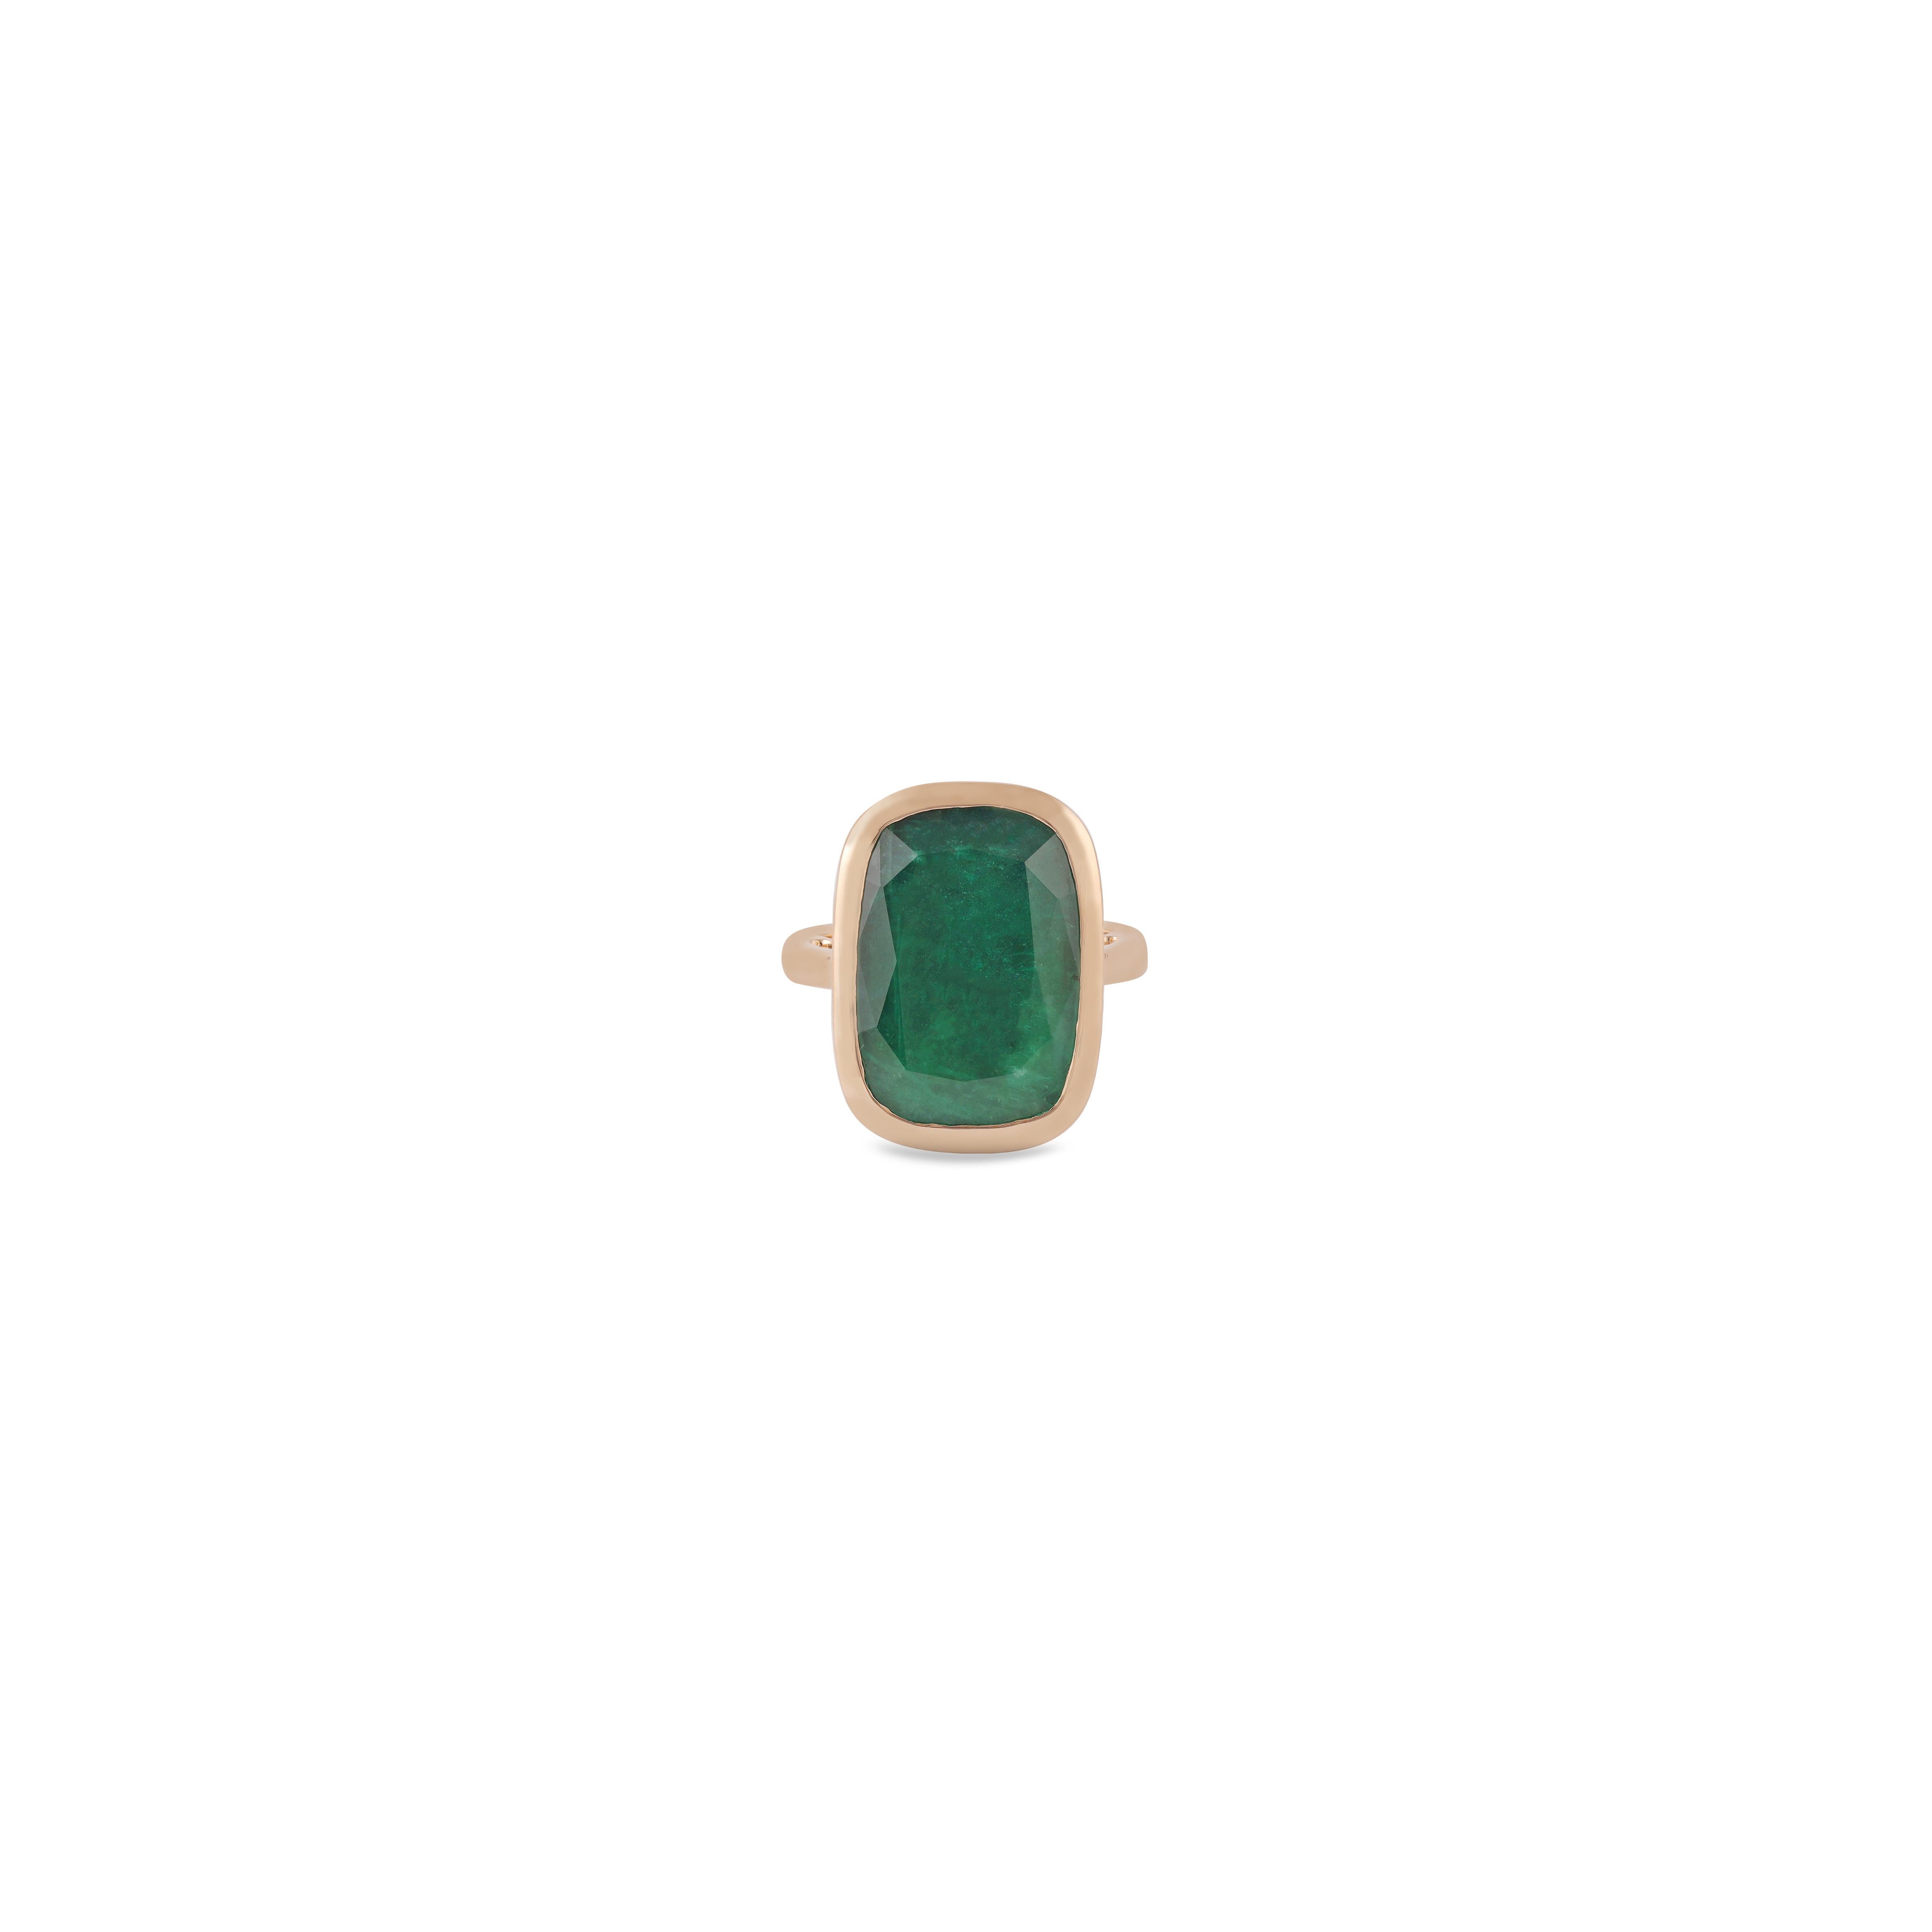 This is an elegant emerald Close Setting ring in studded in 18k Yellow gold with 1 piece of  Zambian emerald weight 7.81 carat which is surrounded Close setting, this entire ring studded in 18k Yellow gold weight 7.07 grams.

Ring size can be change